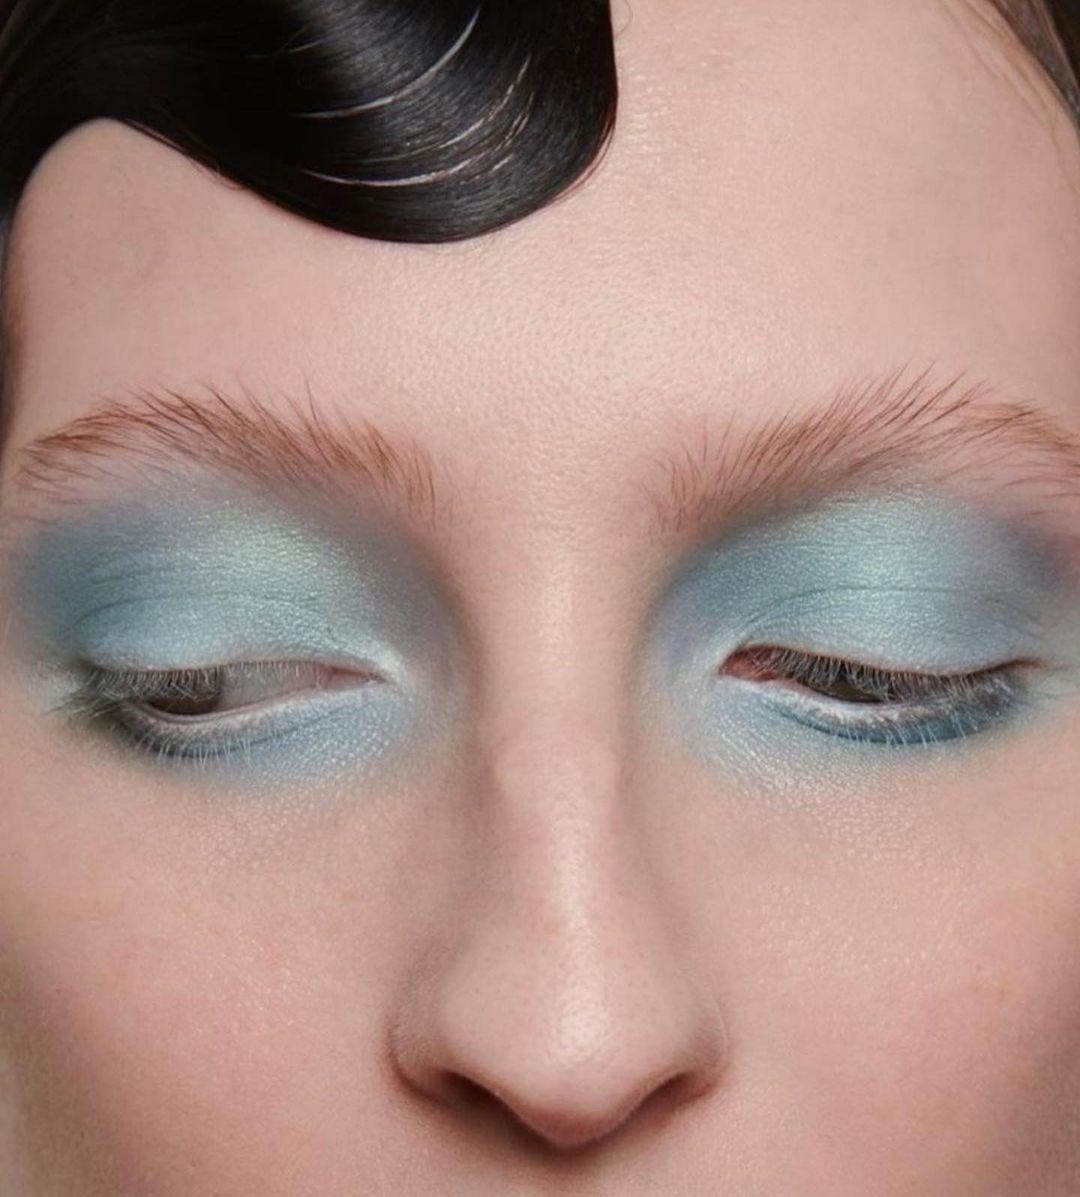 class="content__text"
 #Repost @terrybarberonbeauty with @use.repost 
・・・
Floral Flappers. Pretty colours with decadent shaping for @richardquinn AW23 show London Fashion Week using @maccosmeticsuk MAC X Richard Quinn collection. Styling @carineroitfeld hair by @sammcknight1 Huge thanks to a very crafted MAC Pro Team. #prettymeetsunpretty #macxrichardquinn 
 